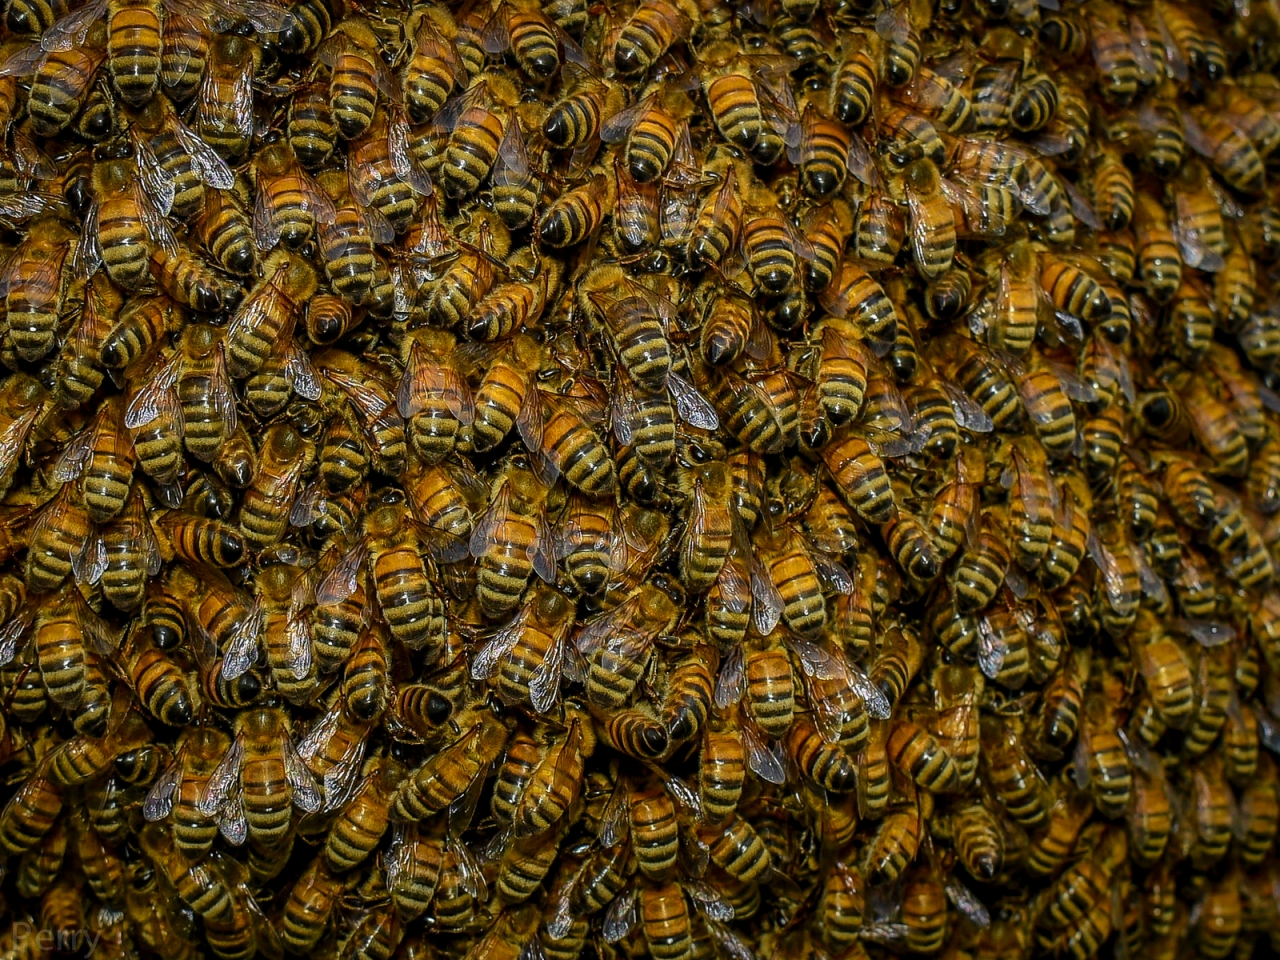 Swarm of Bees for 1280 x 960 resolution